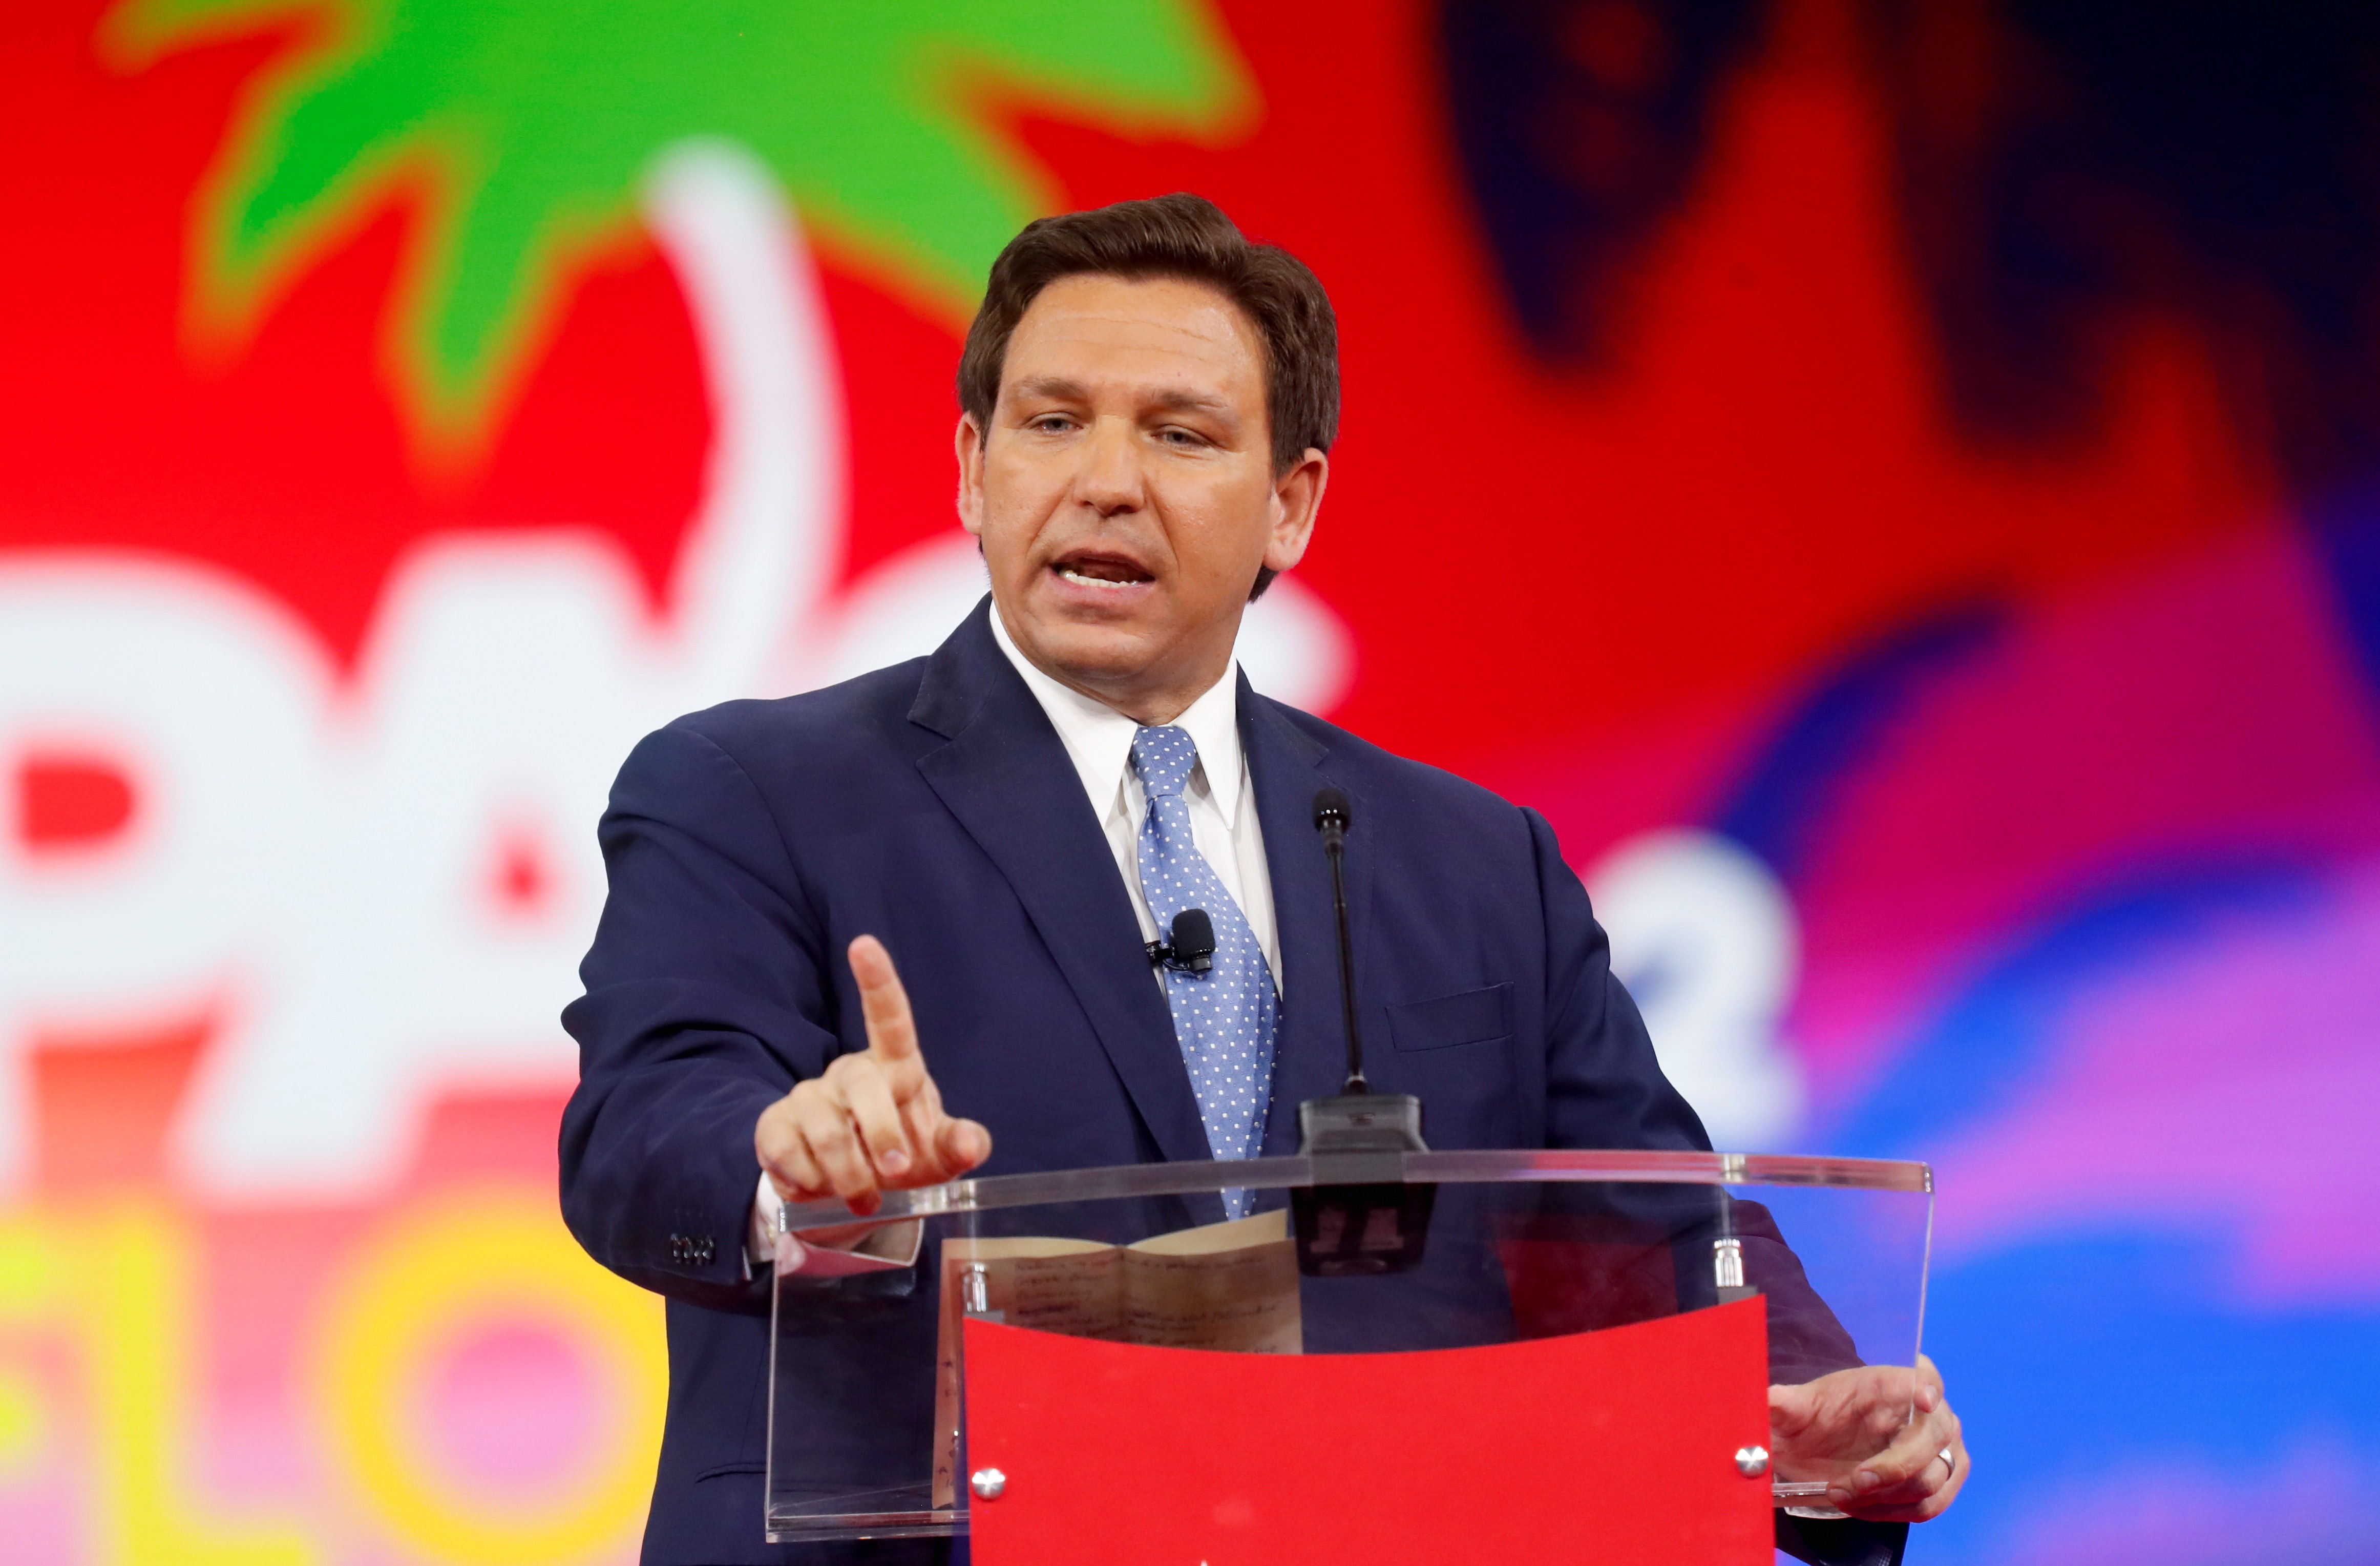 2024 Watch: In the fundraising fight, Ron DeSantis is the $100 million man